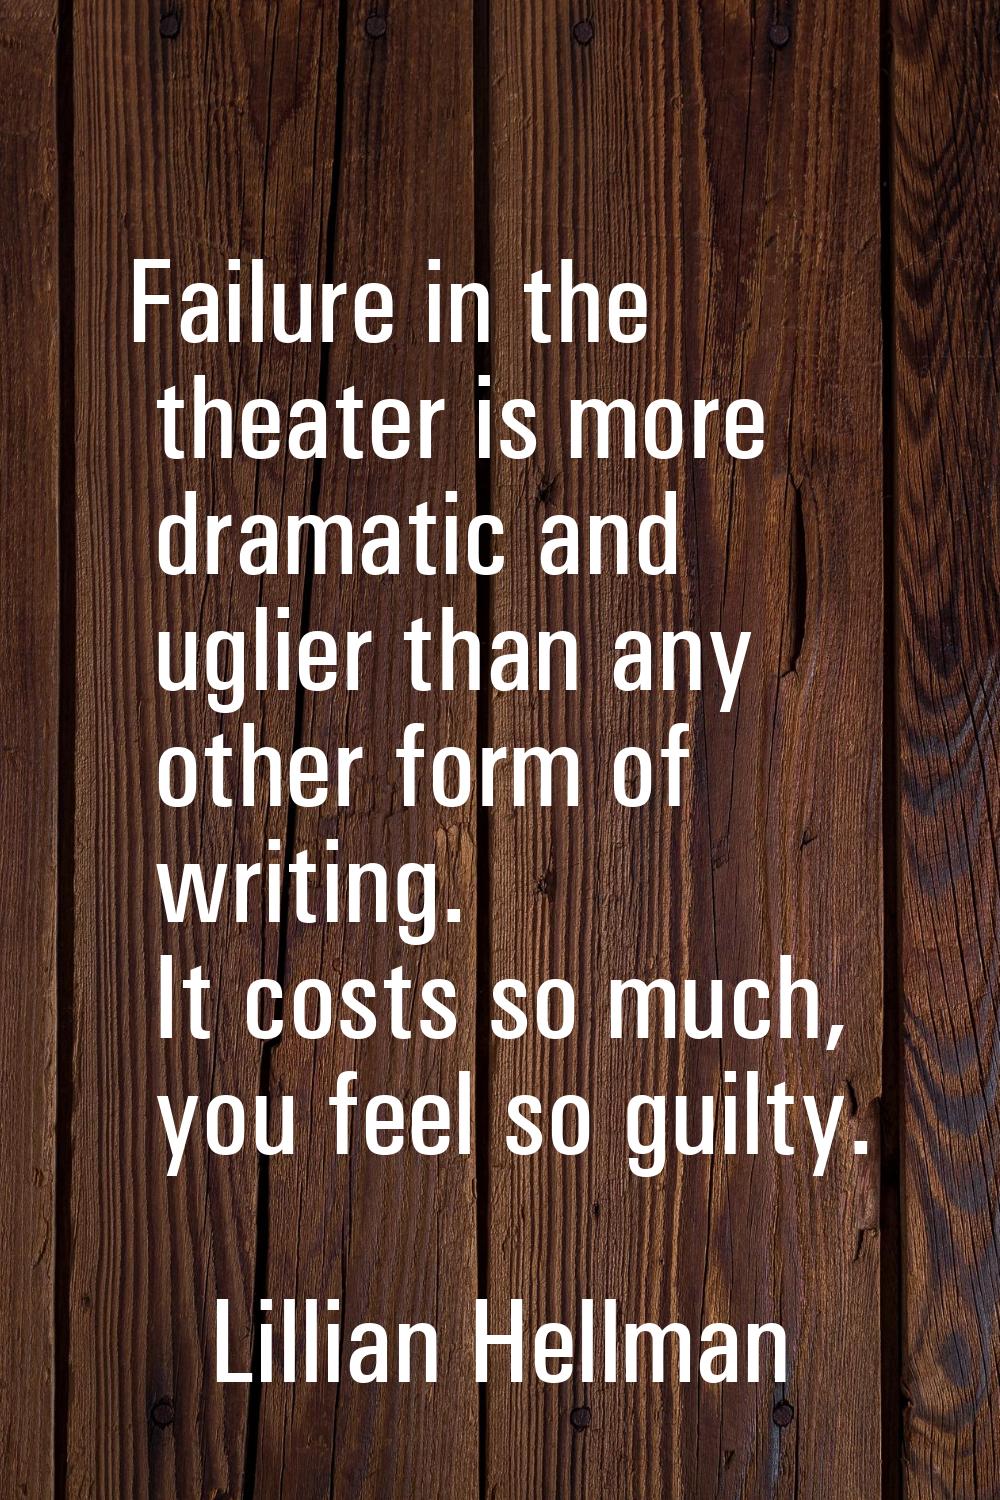 Failure in the theater is more dramatic and uglier than any other form of writing. It costs so much